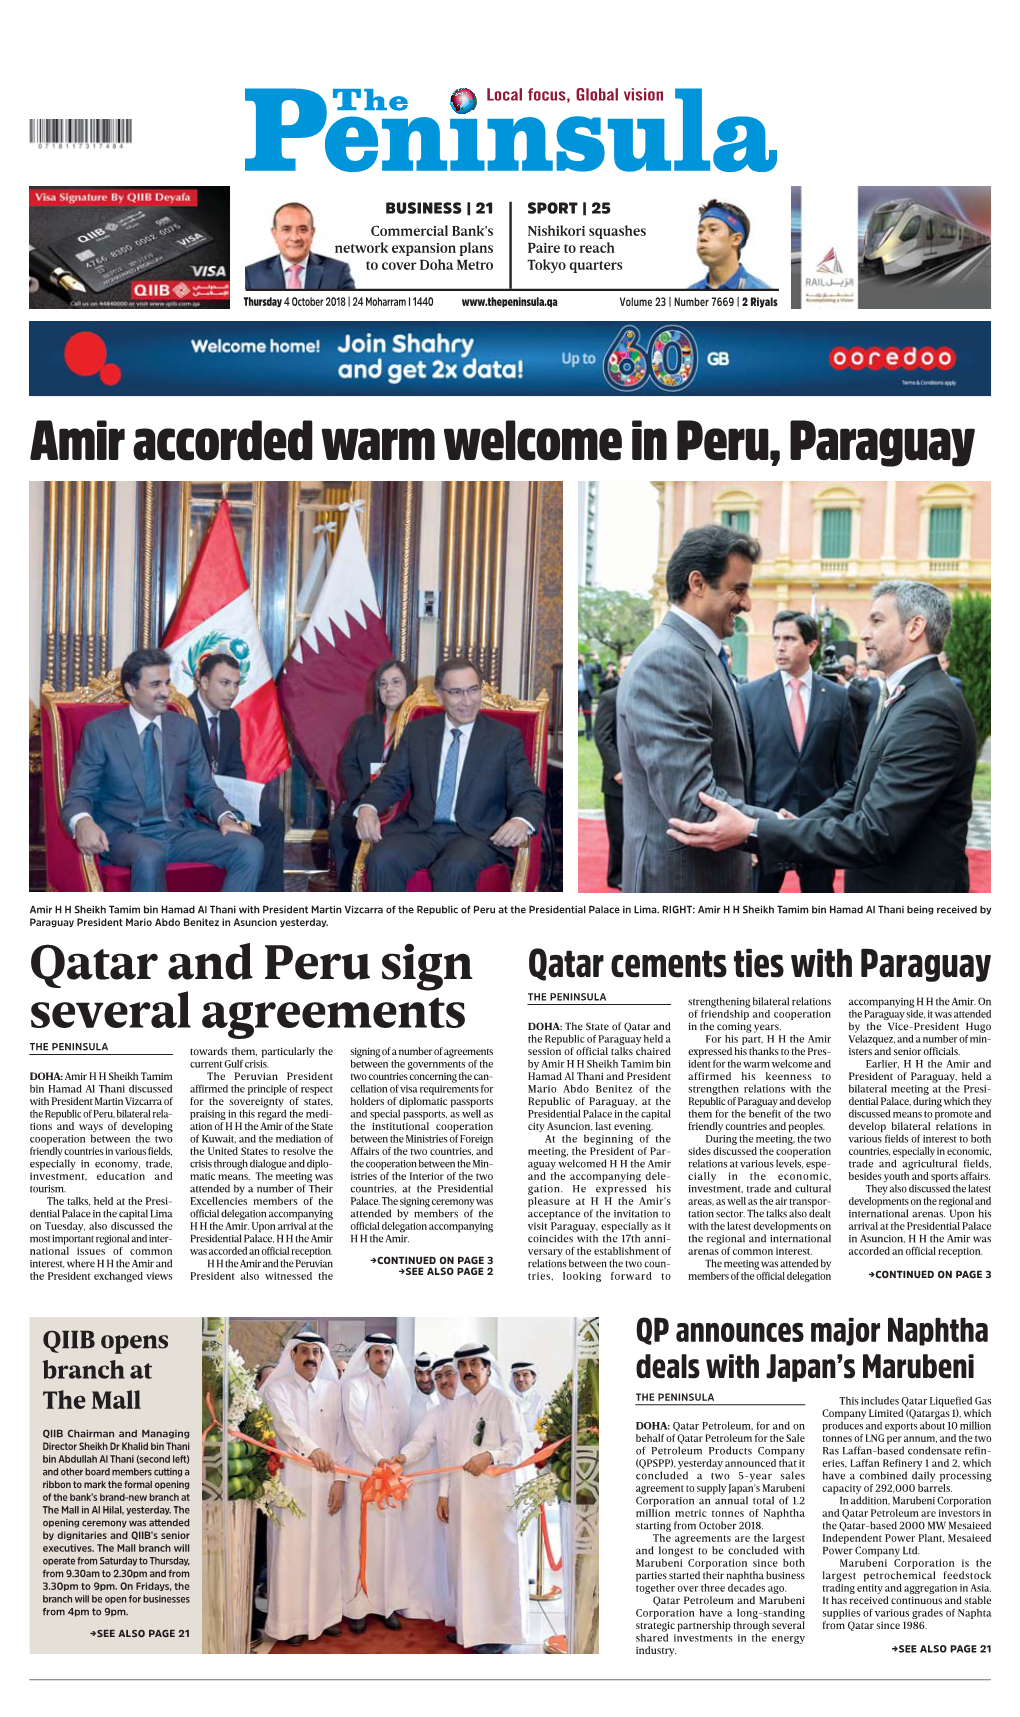 Amir Accorded Warm Welcome in Peru, Paraguay